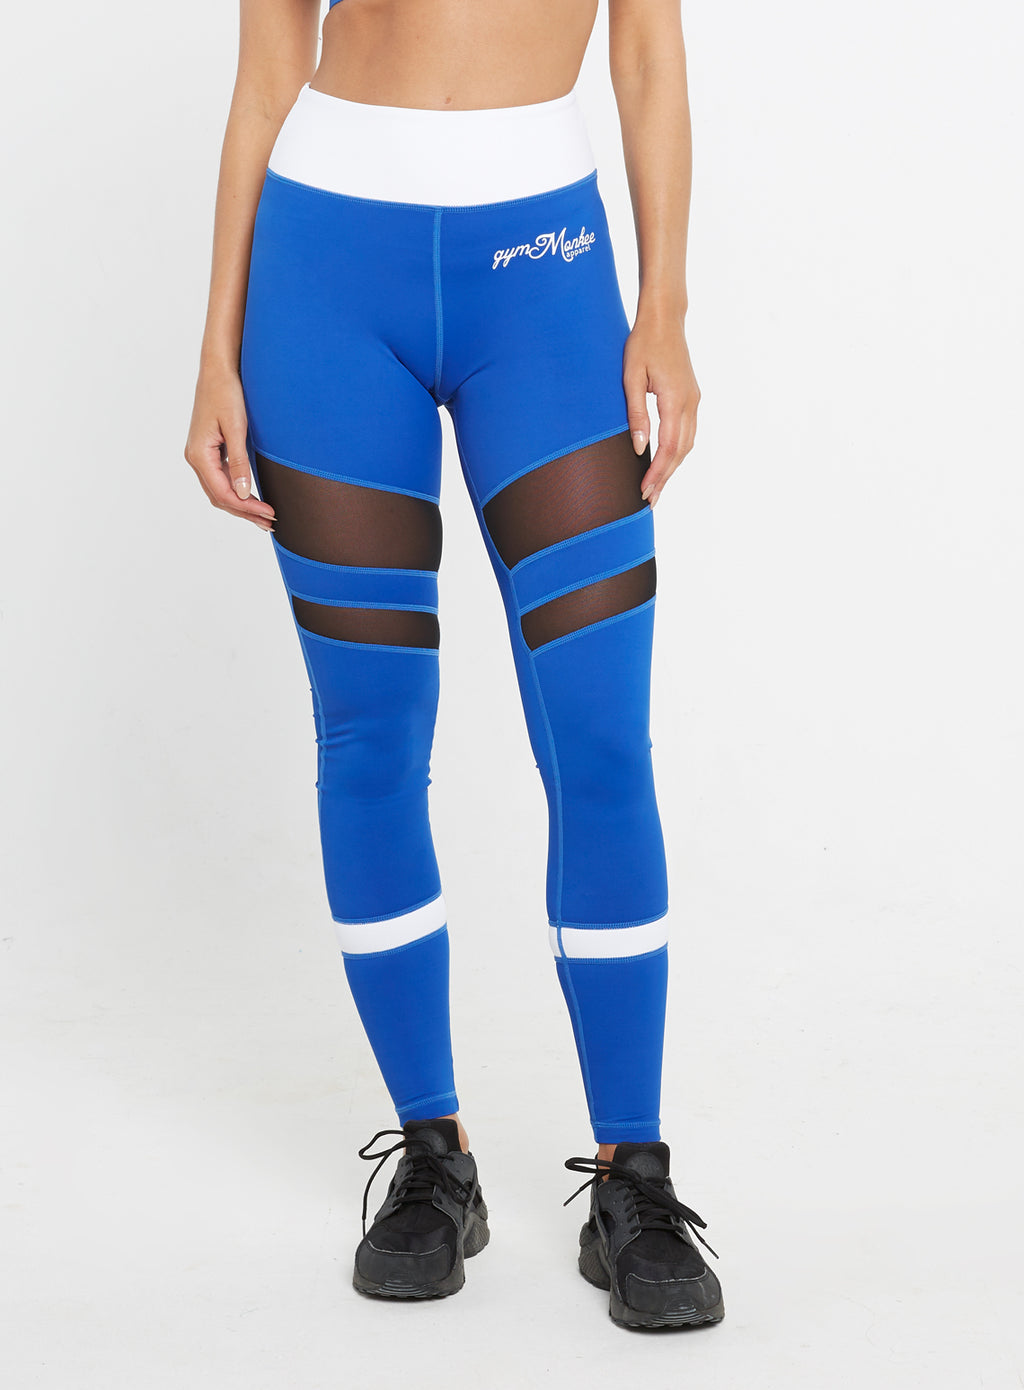 Gym Monkee - Ladies Blue and White Leggings FRONT